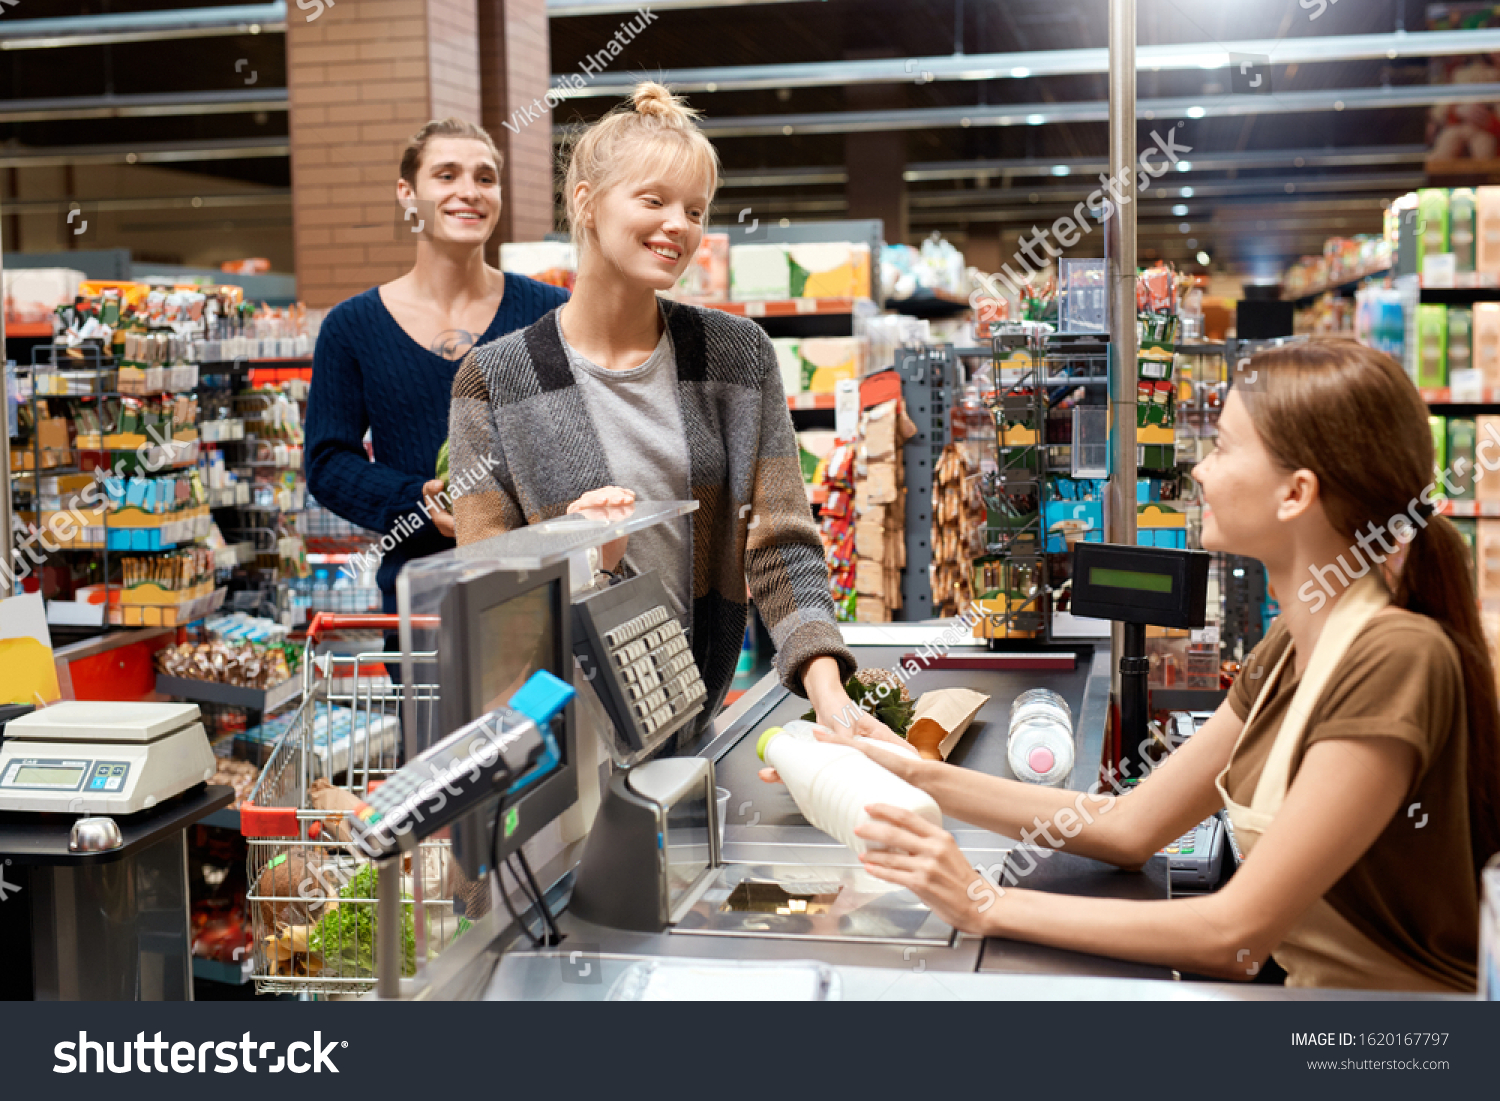 Young couple at the supermarket doing daily shoppings checkout at cashier counter smiling happy #1620167797